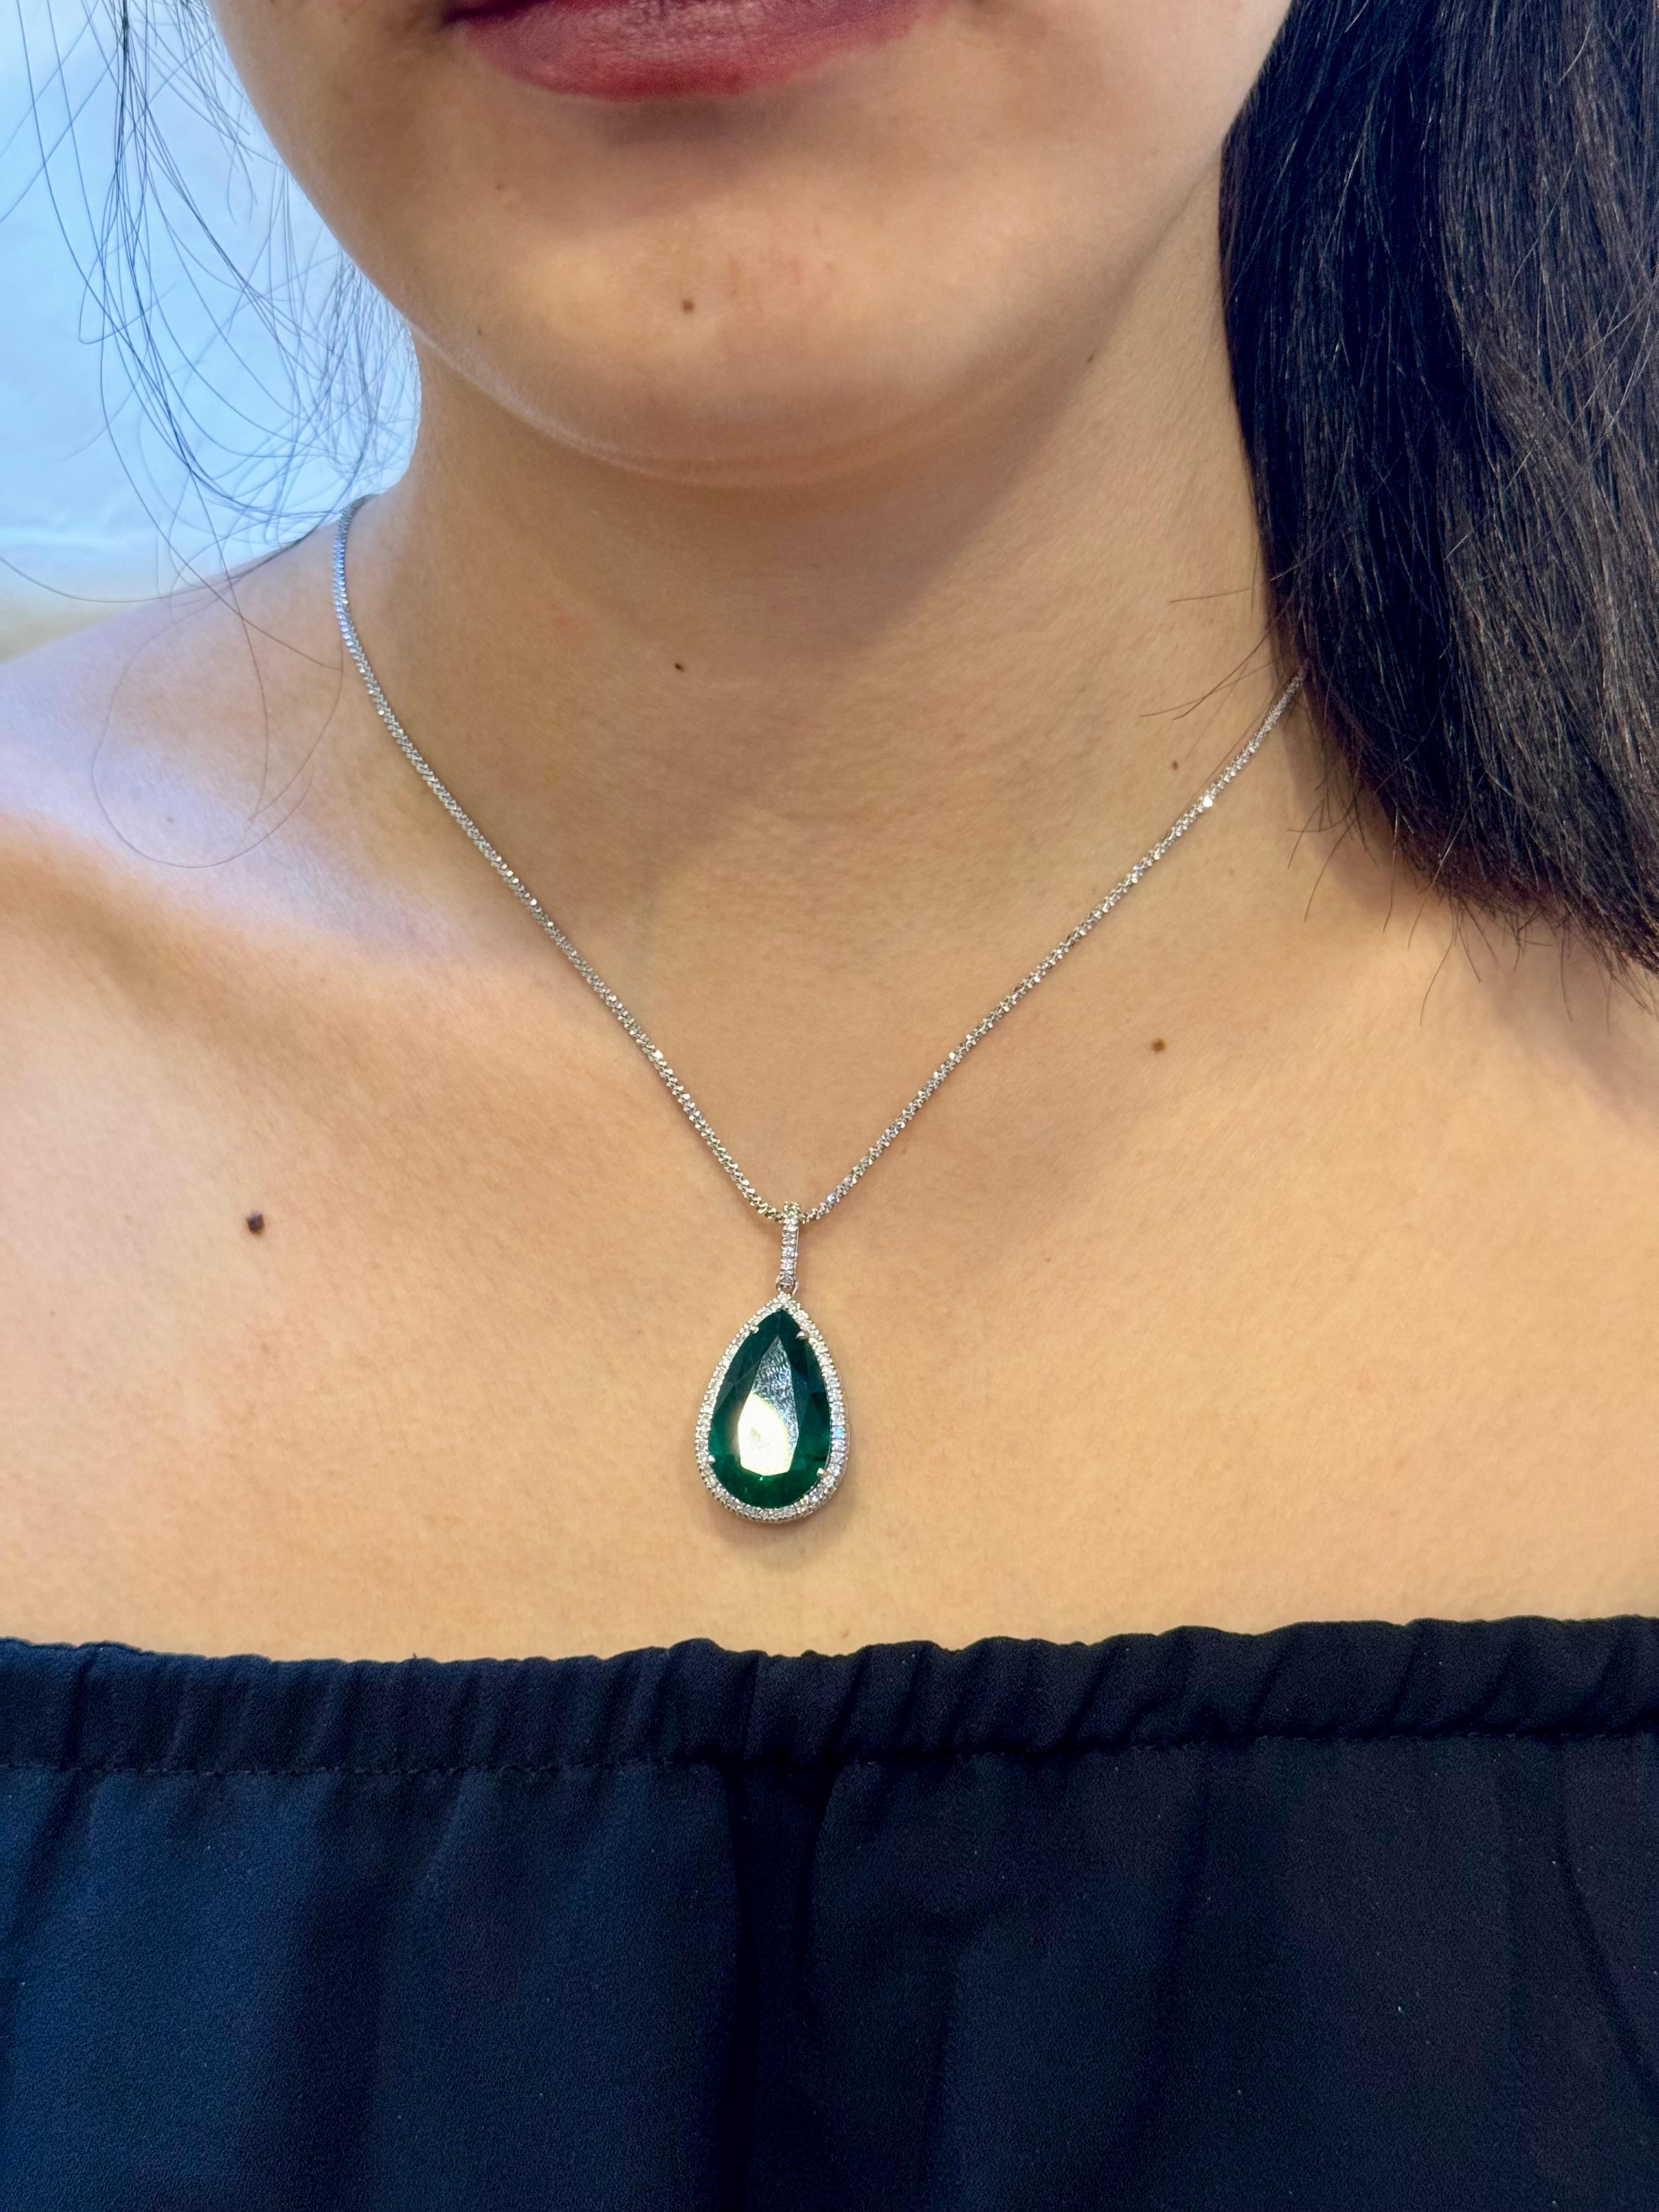 19 Ct Pear Cut Emerald & 1 Ct Diamond Halo Pendent/Necklace 14 KW Gold Chain For Sale 16